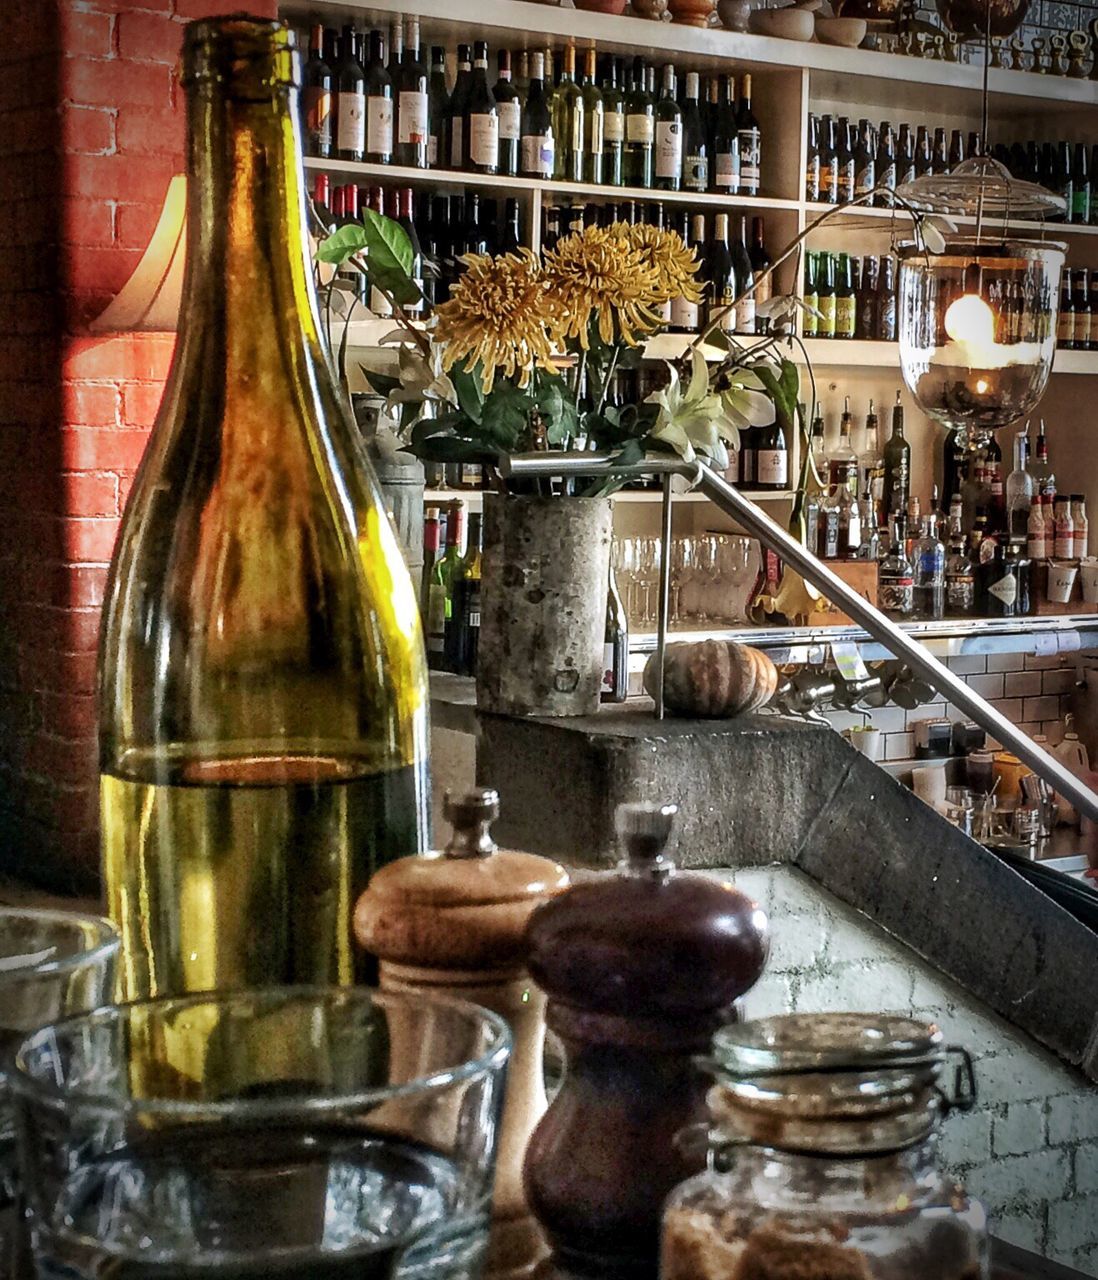 indoors, food and drink, freshness, still life, table, arrangement, food, in a row, glass - material, variation, large group of objects, abundance, choice, no people, shelf, for sale, reflection, close-up, retail, restaurant